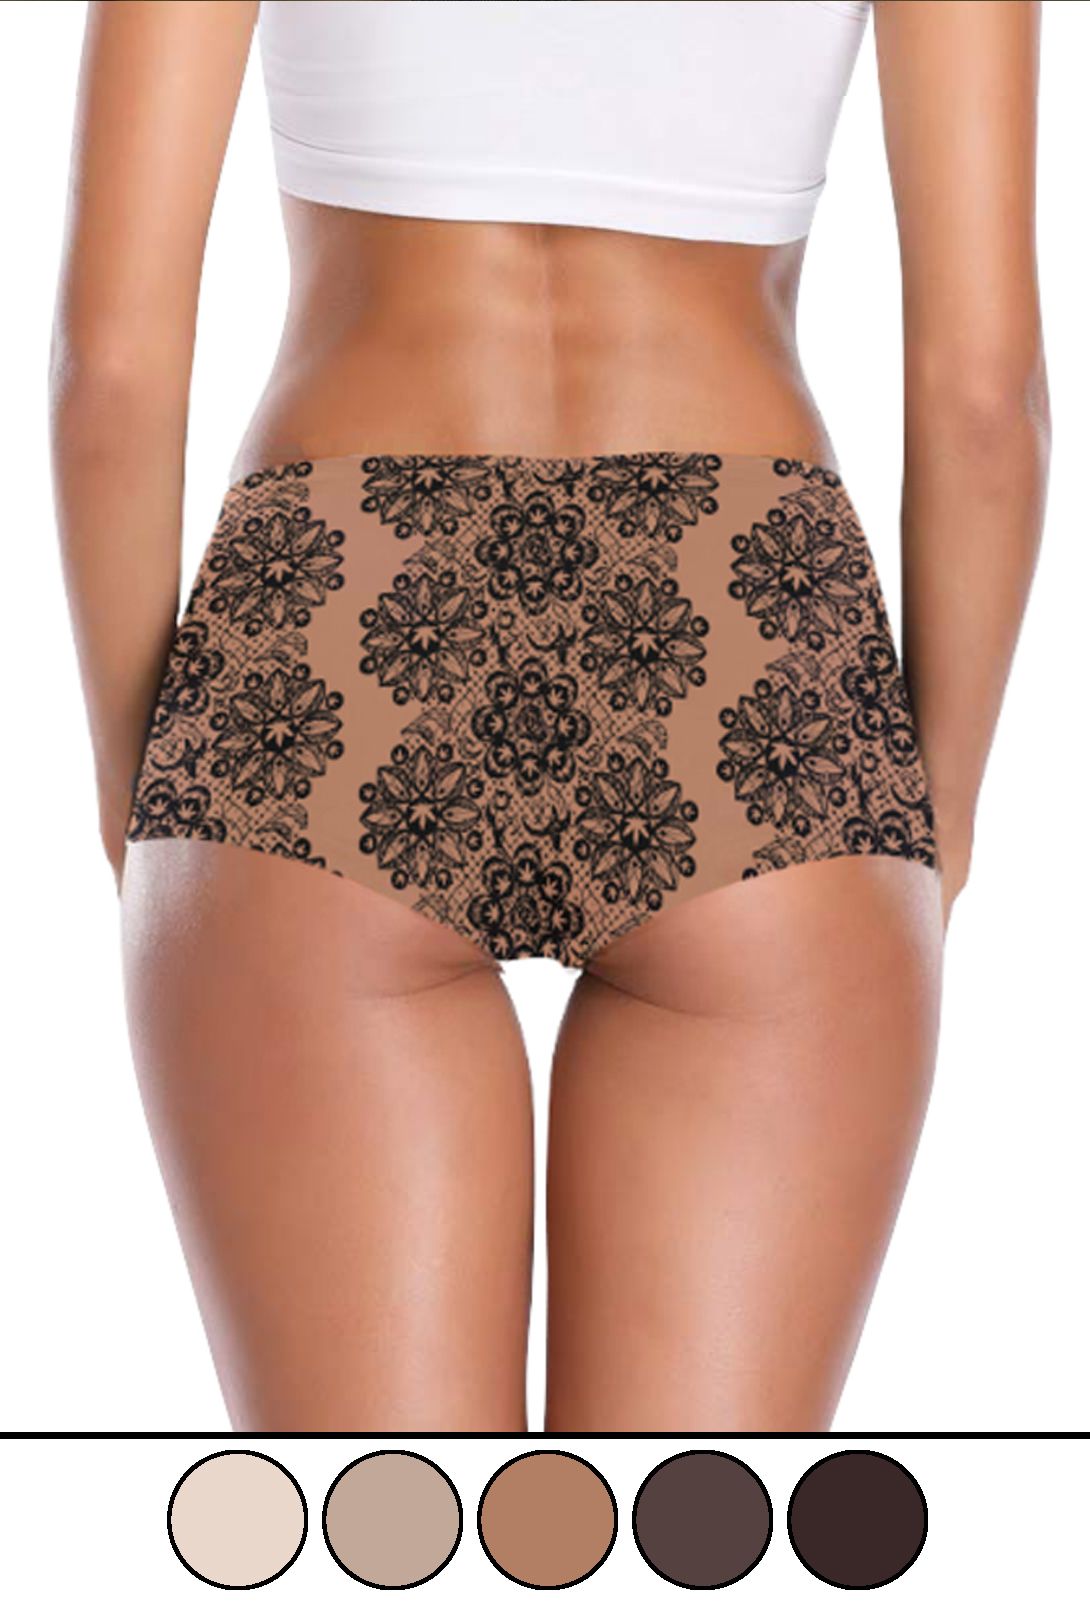 just get high_booty short undewear_almond lace_web